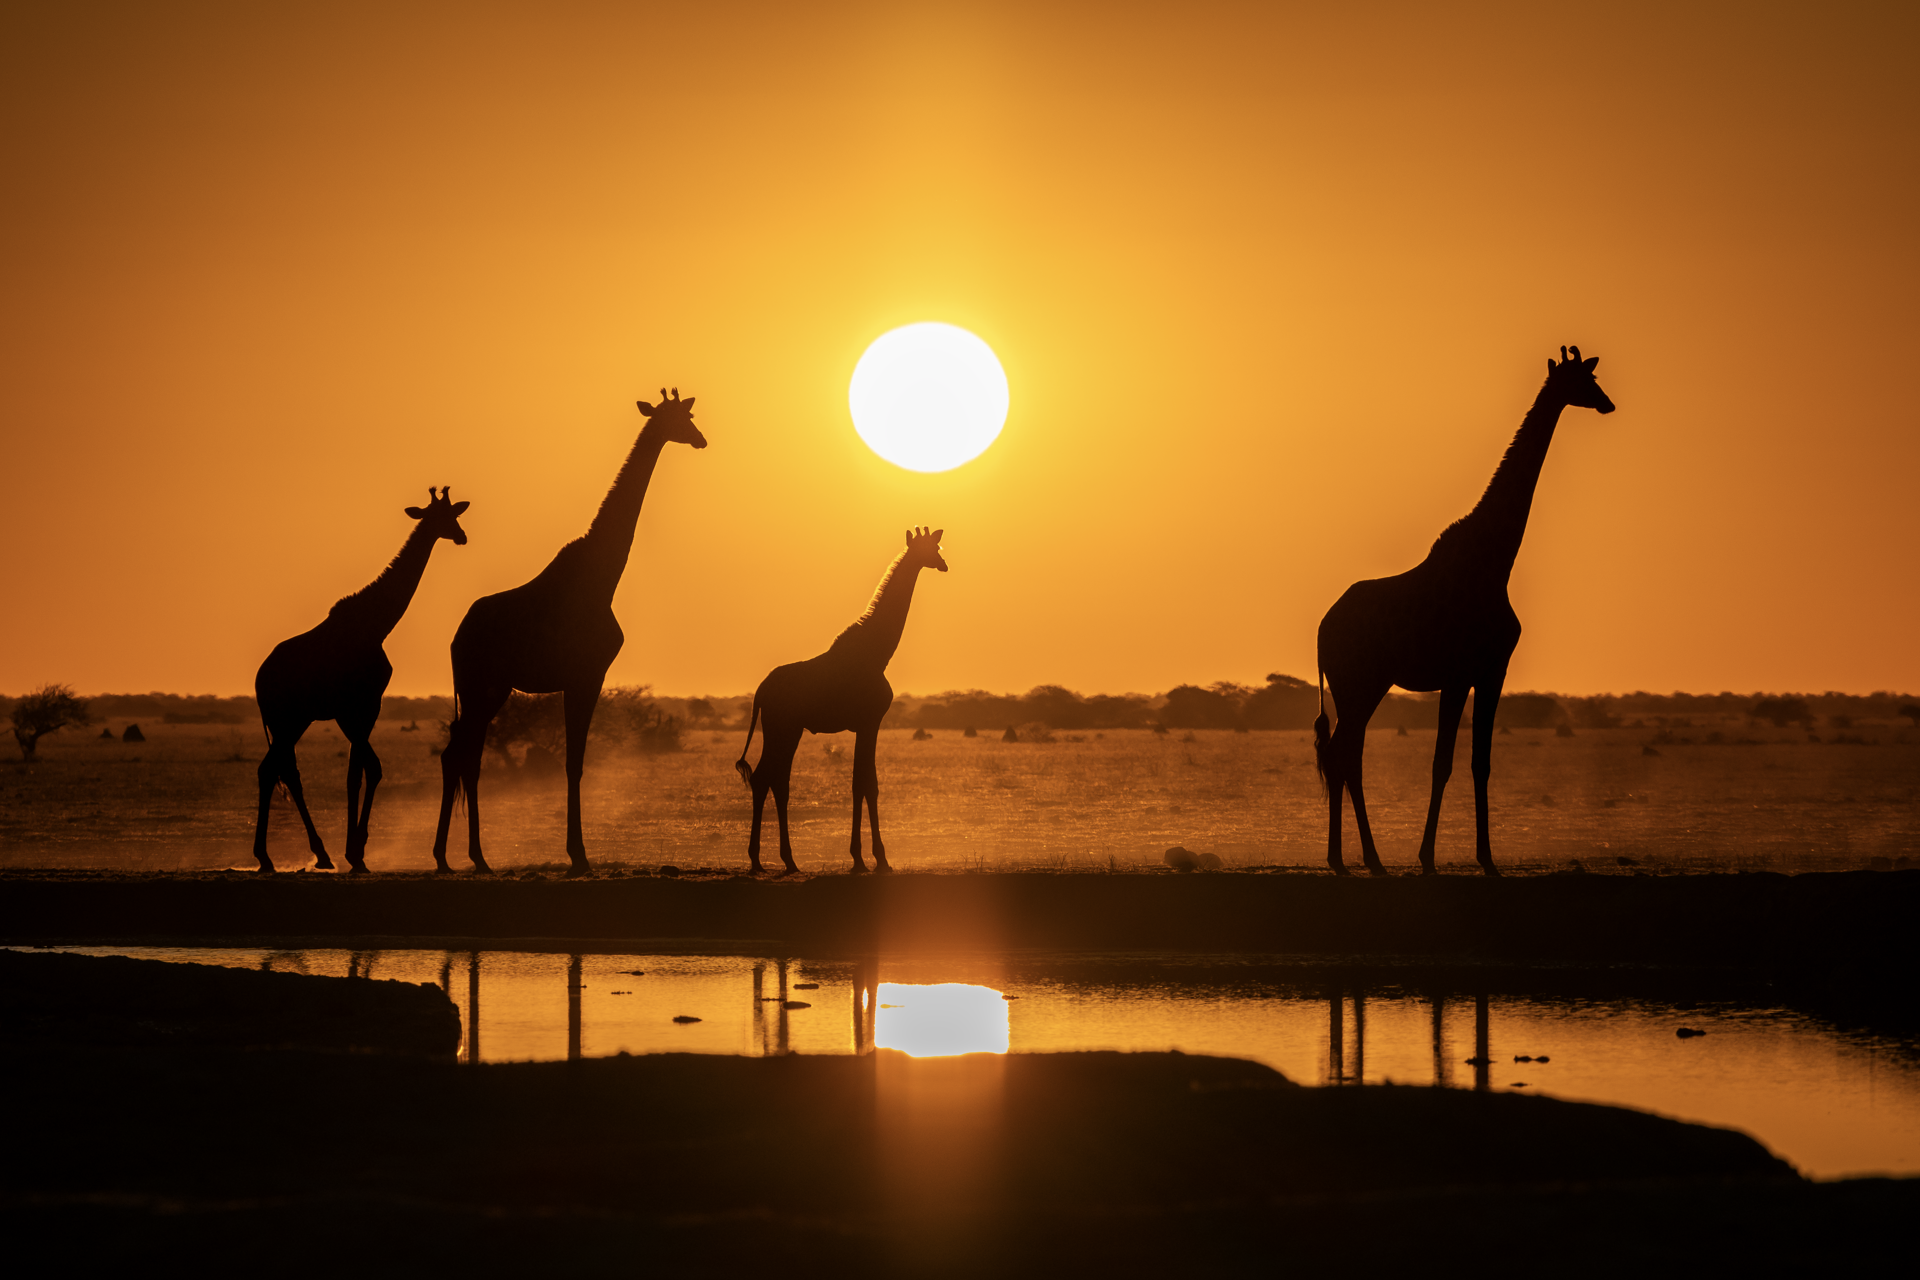 a group of giraffes standing in front of a sunset